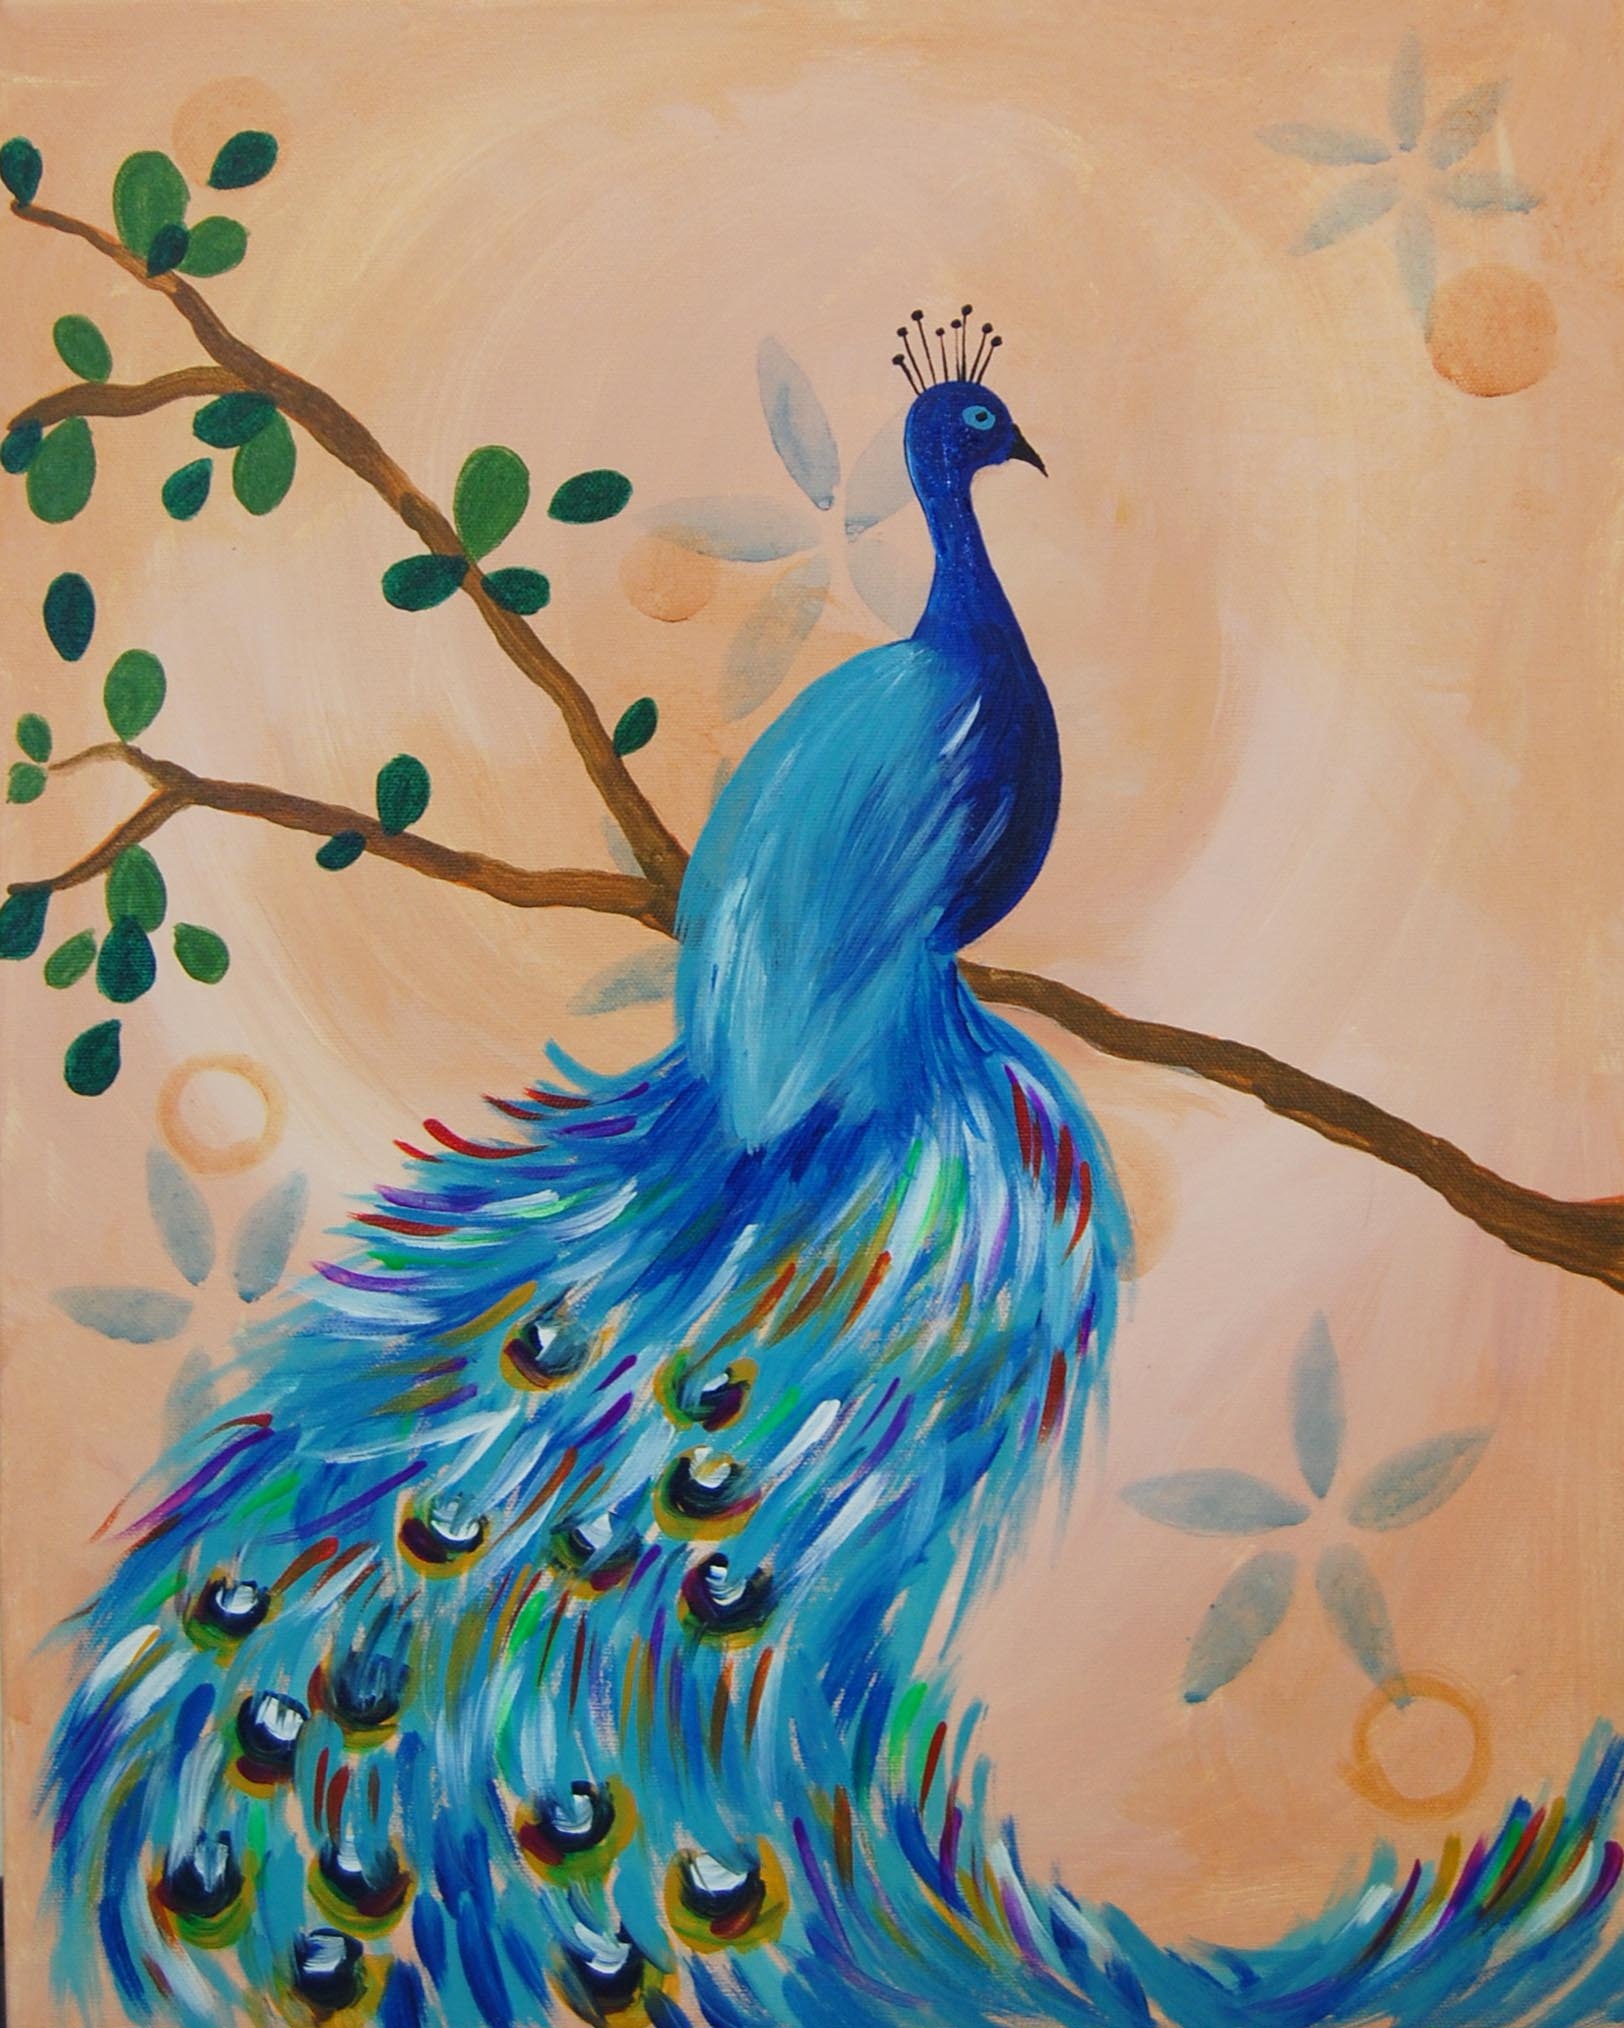 Vintage Peacock - Pinot's Palette Painting